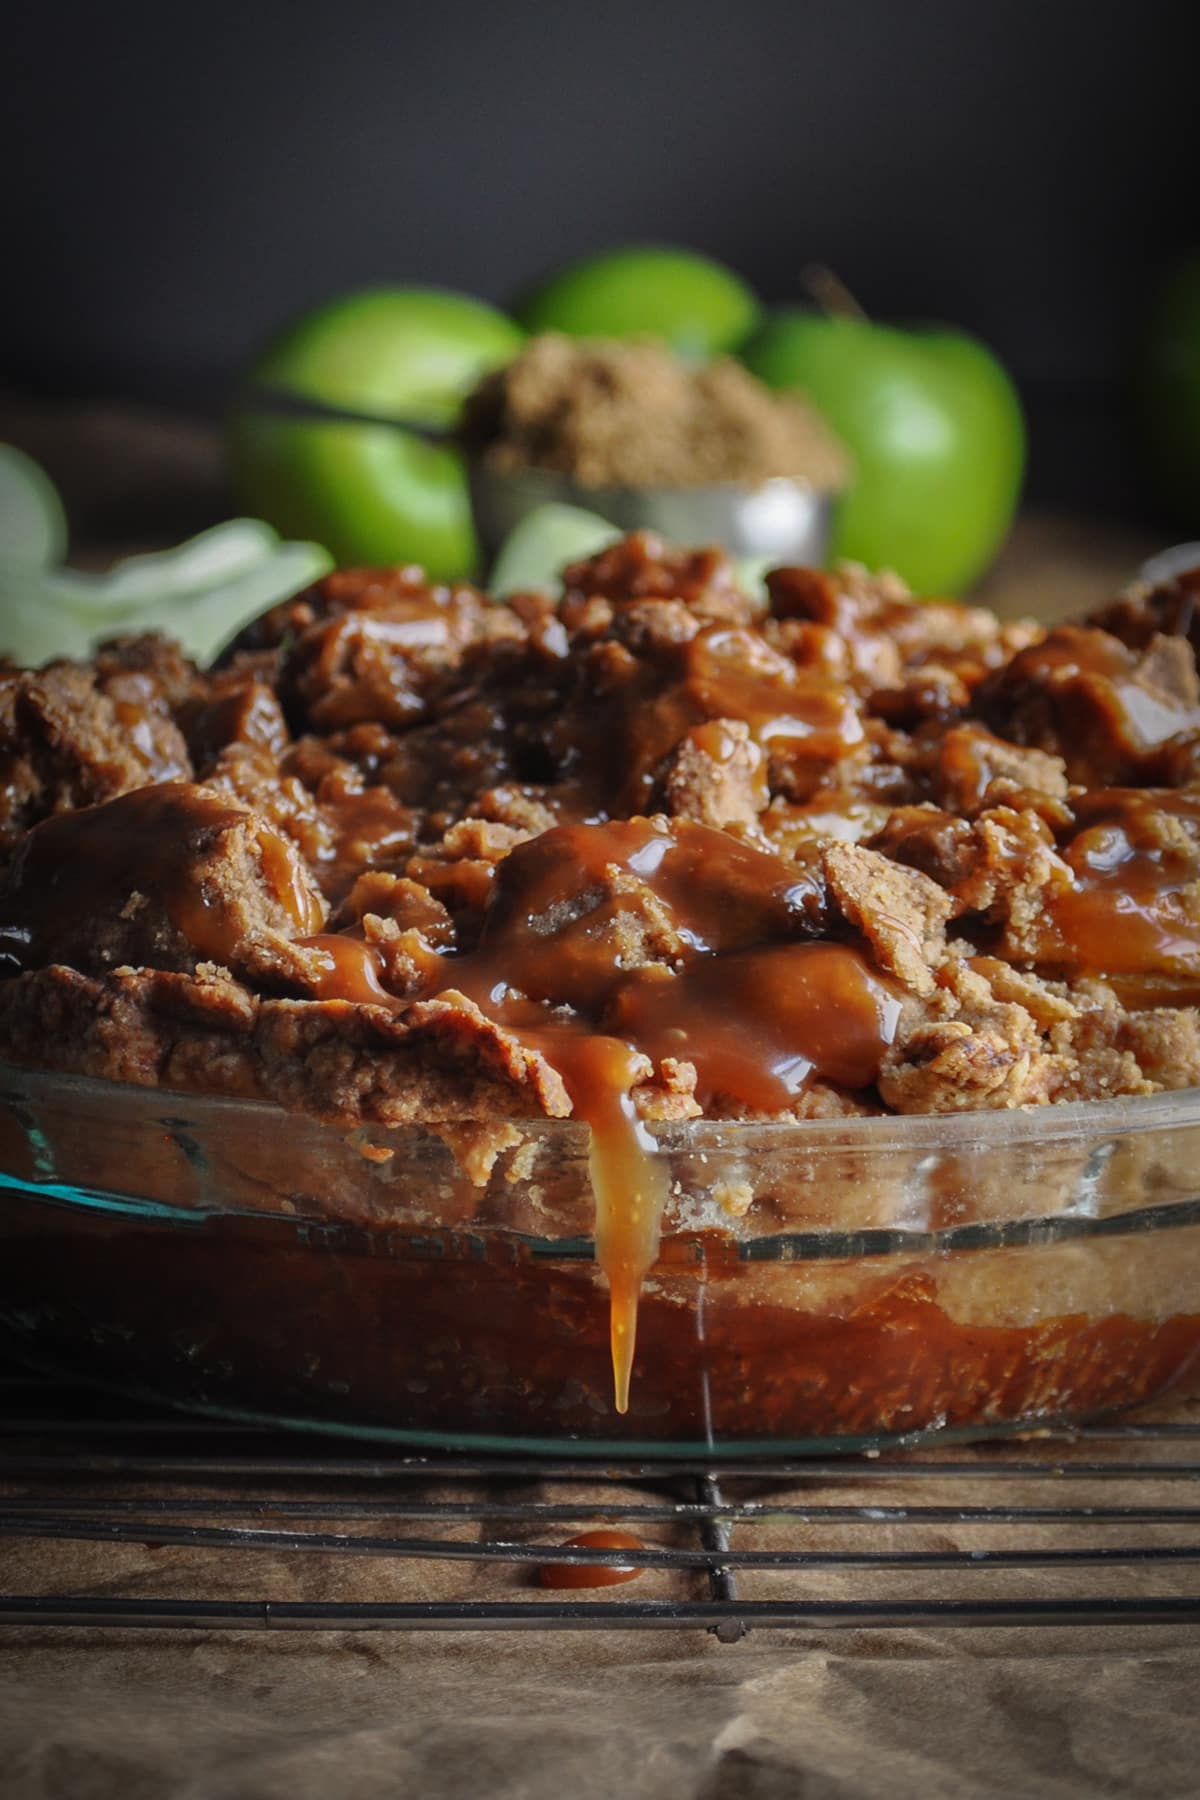 A salted caramel apple pie with crumb topping cooling on a wire rack. Caramel sauce is dripping over the side of the pie plate.